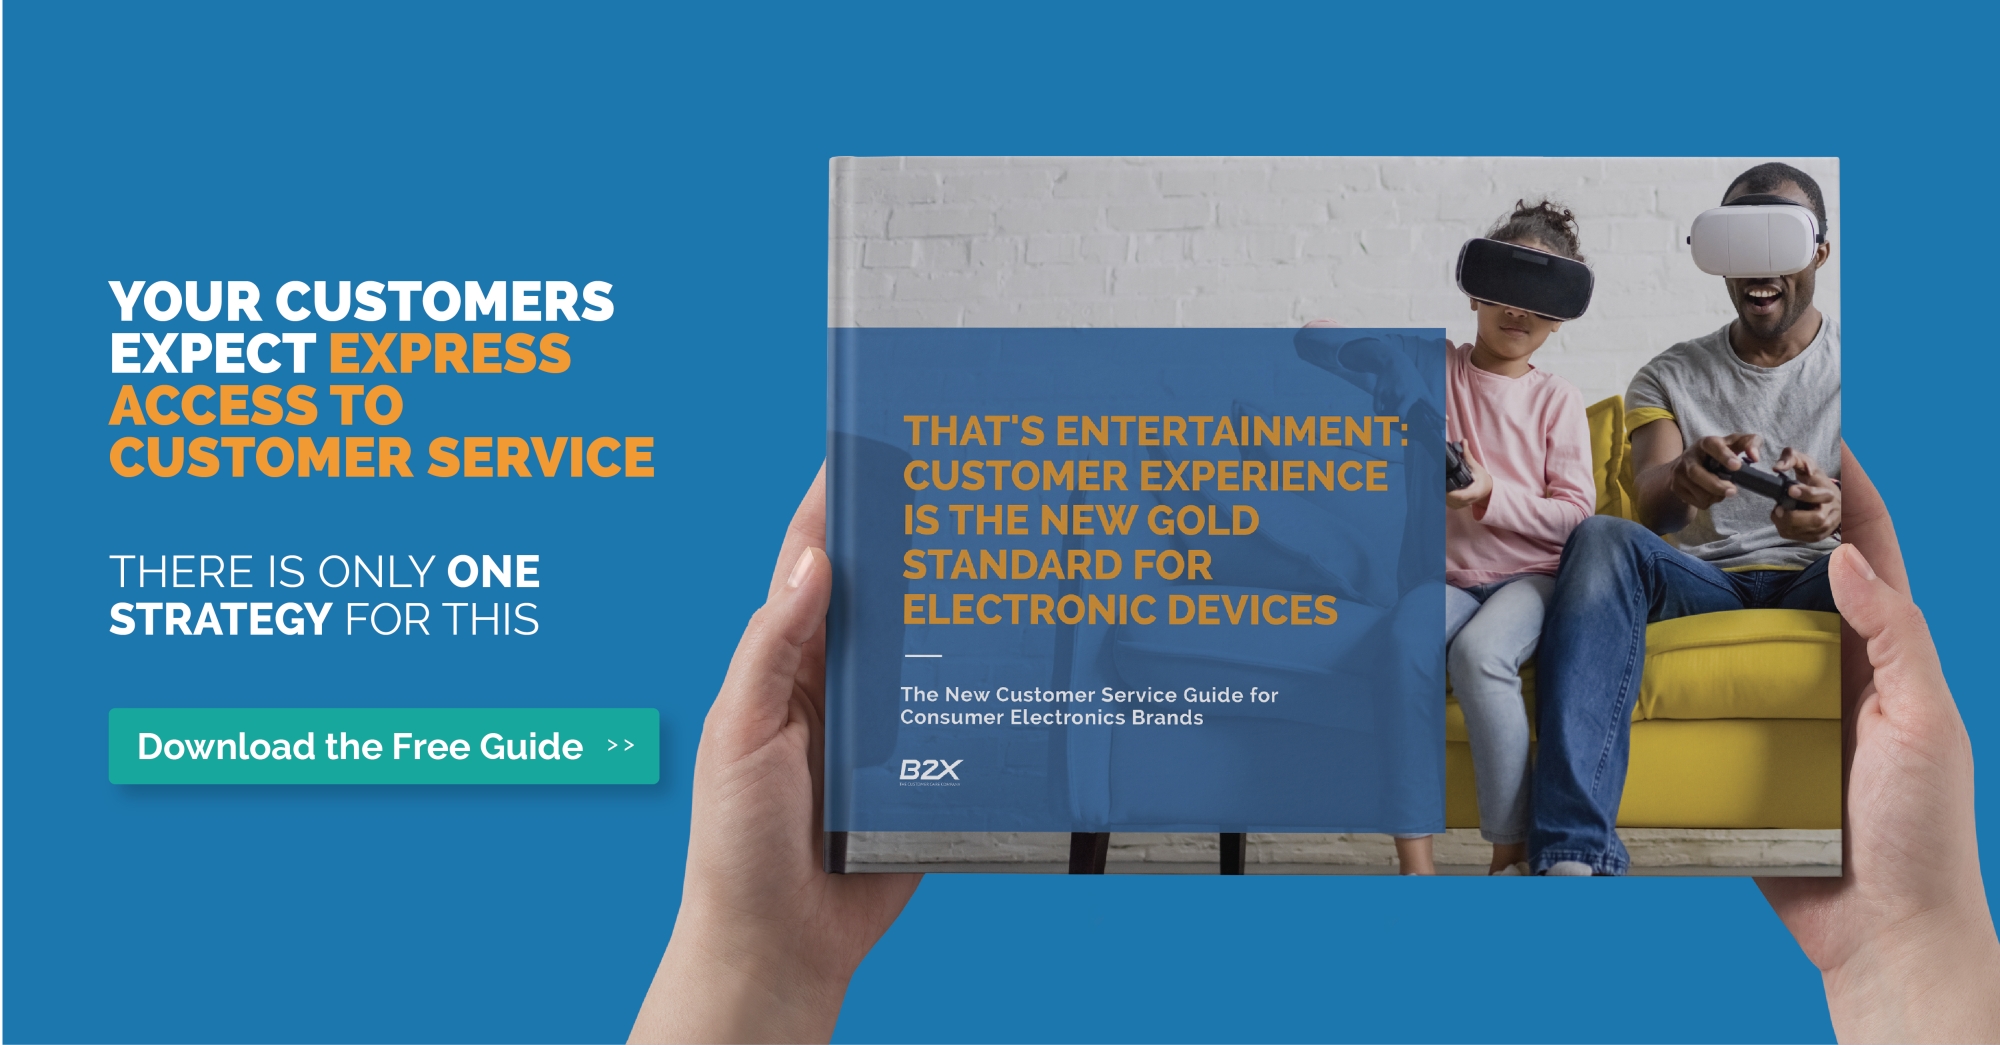 The new customer service guide for consumer electronics brands